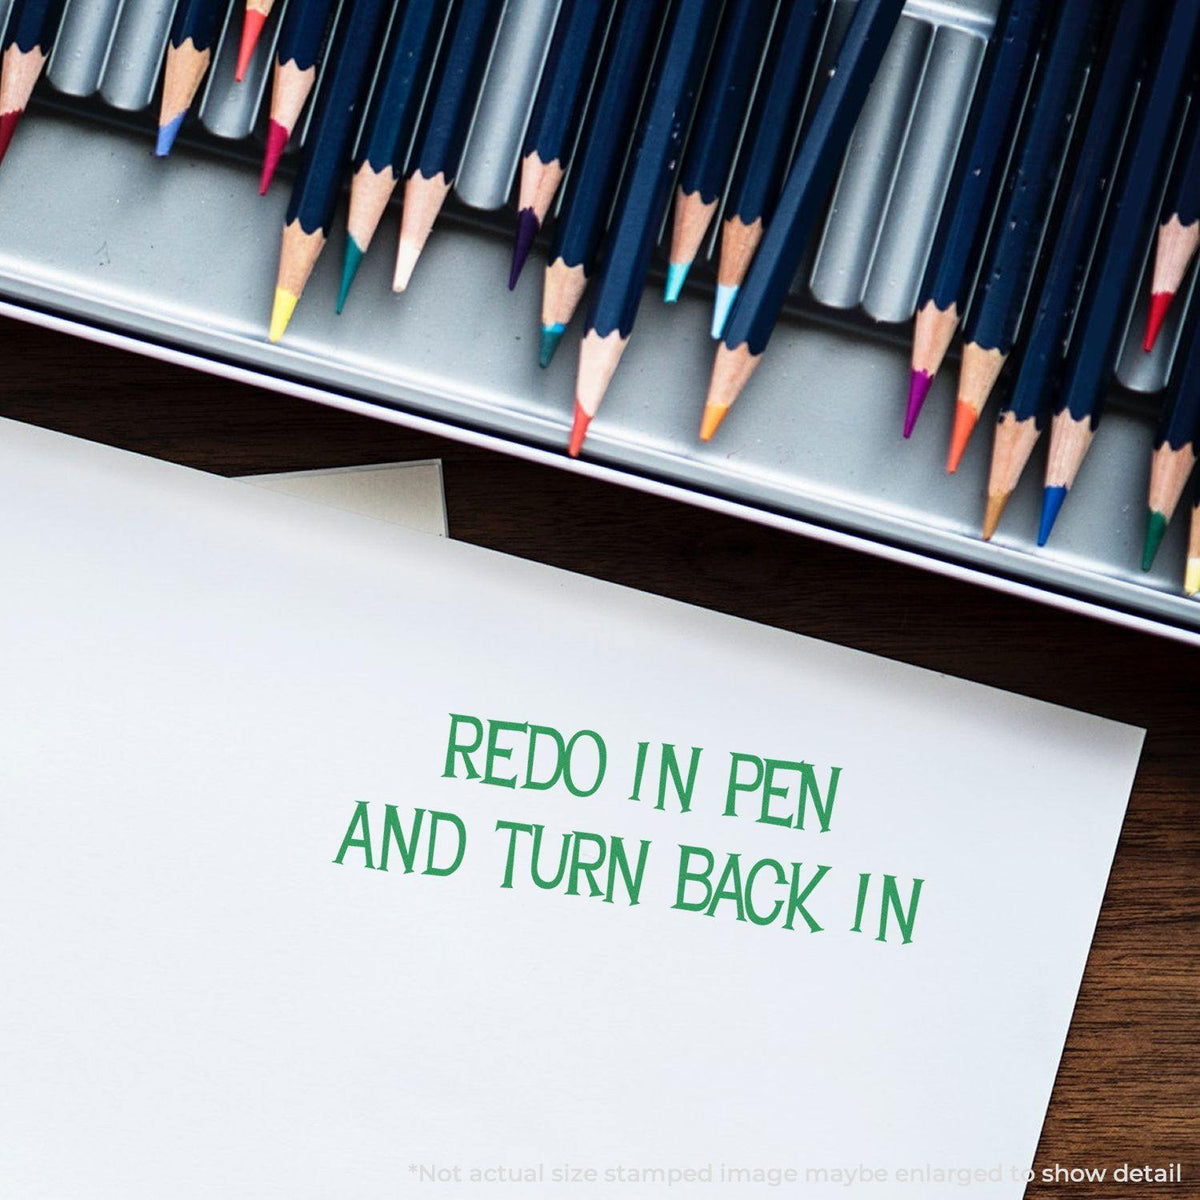 Large Redo In Pencil And Turn Back In Teacher Rubber Stamp Lifestyle Photo